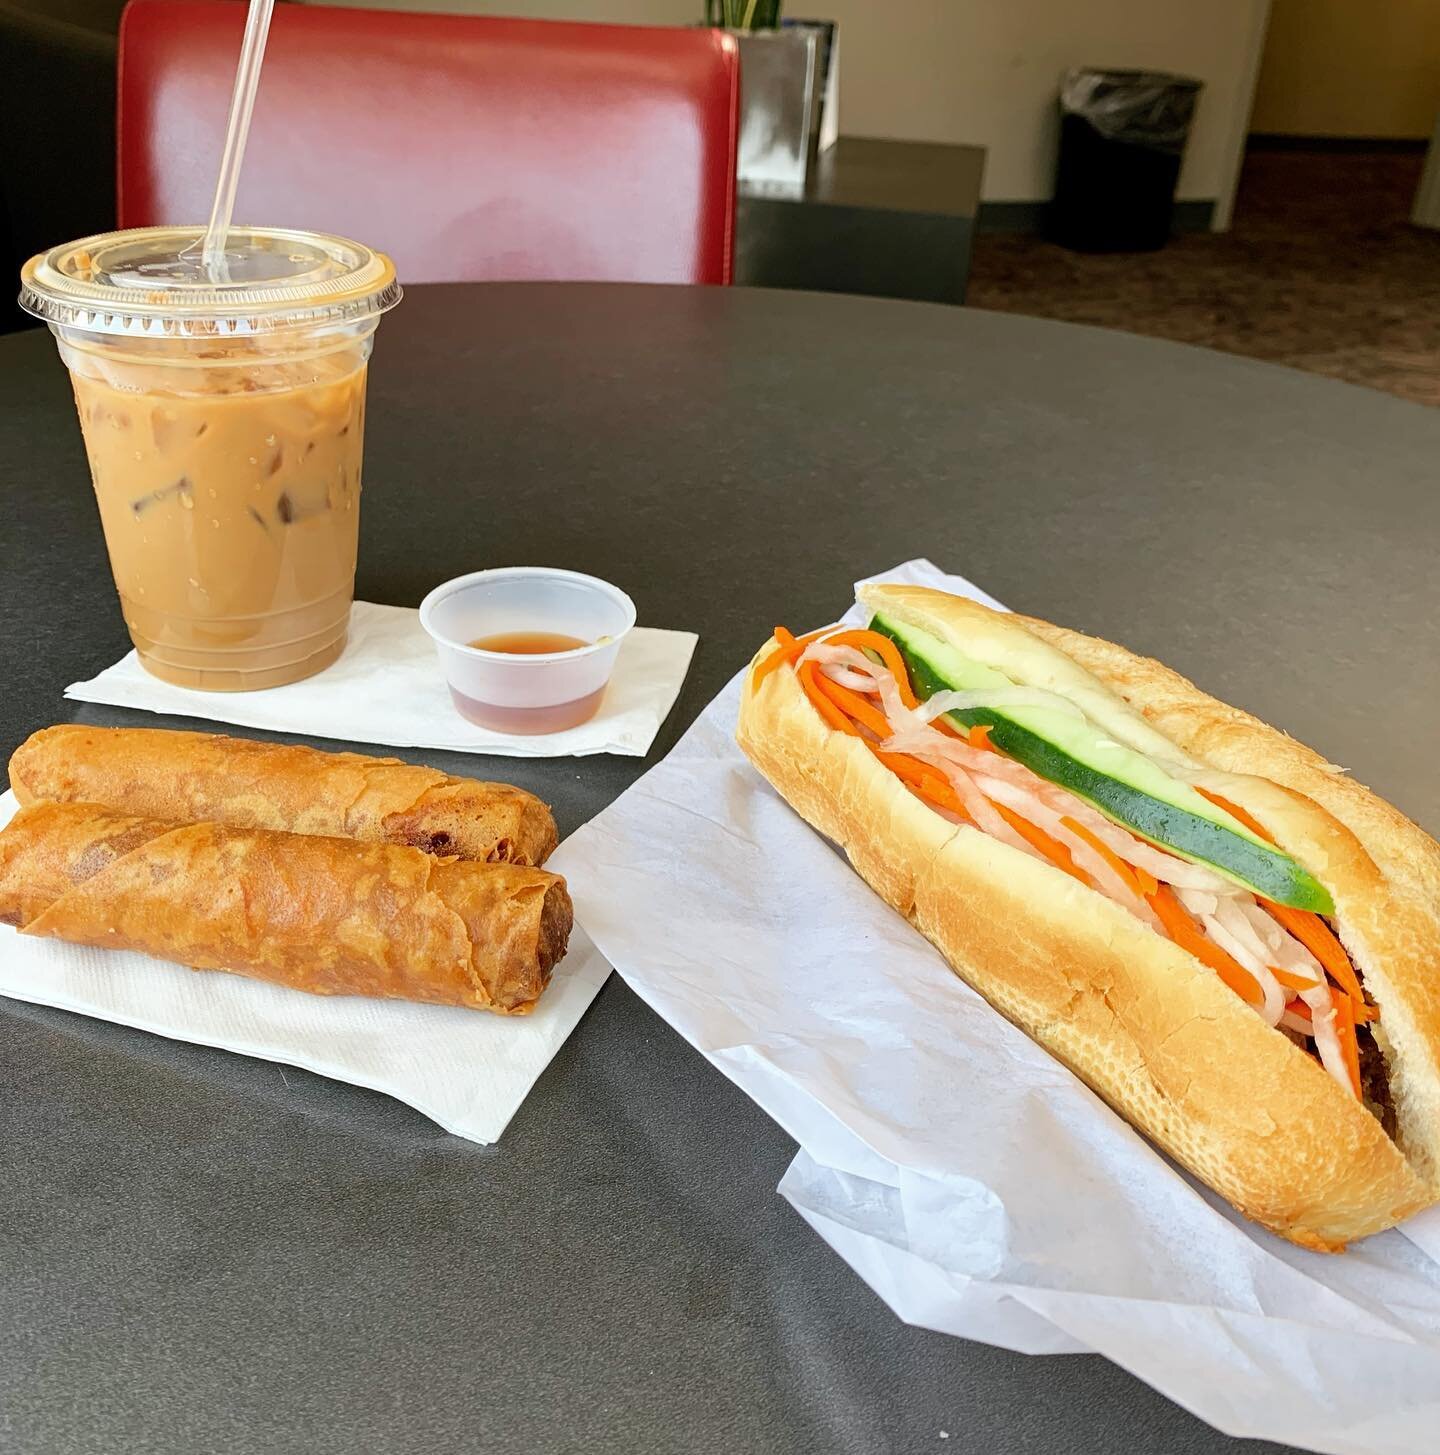 When you&rsquo;re bummed to go sit at the mechanic but then remember that bringing @hello.basil makes everything better. 😋🍽🎉
.
.
.
#memberlove #basil #everettwashington #everettwa #bahnmi #eggrolls #everettfoodie #vietnemesefood #snohomishcounty #